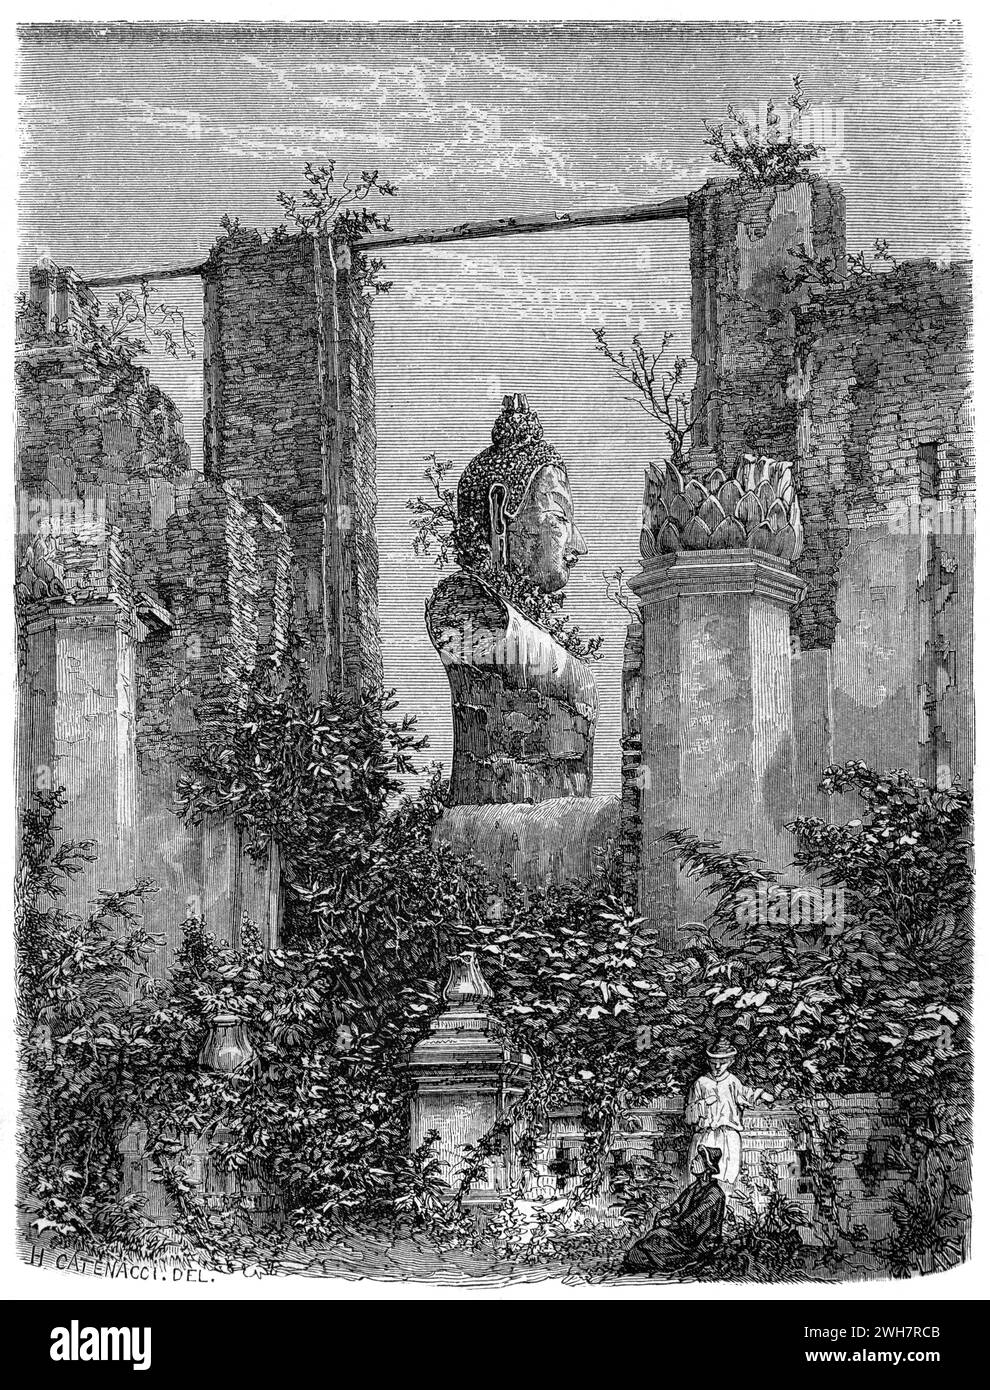 Overground Ruins with Giant Buddha Statue Covered with Creepers & Ivy at Ayutthaya Historical Park Thailand. Vintage or Historical Engraving or Illustration 1863 Stock Photo